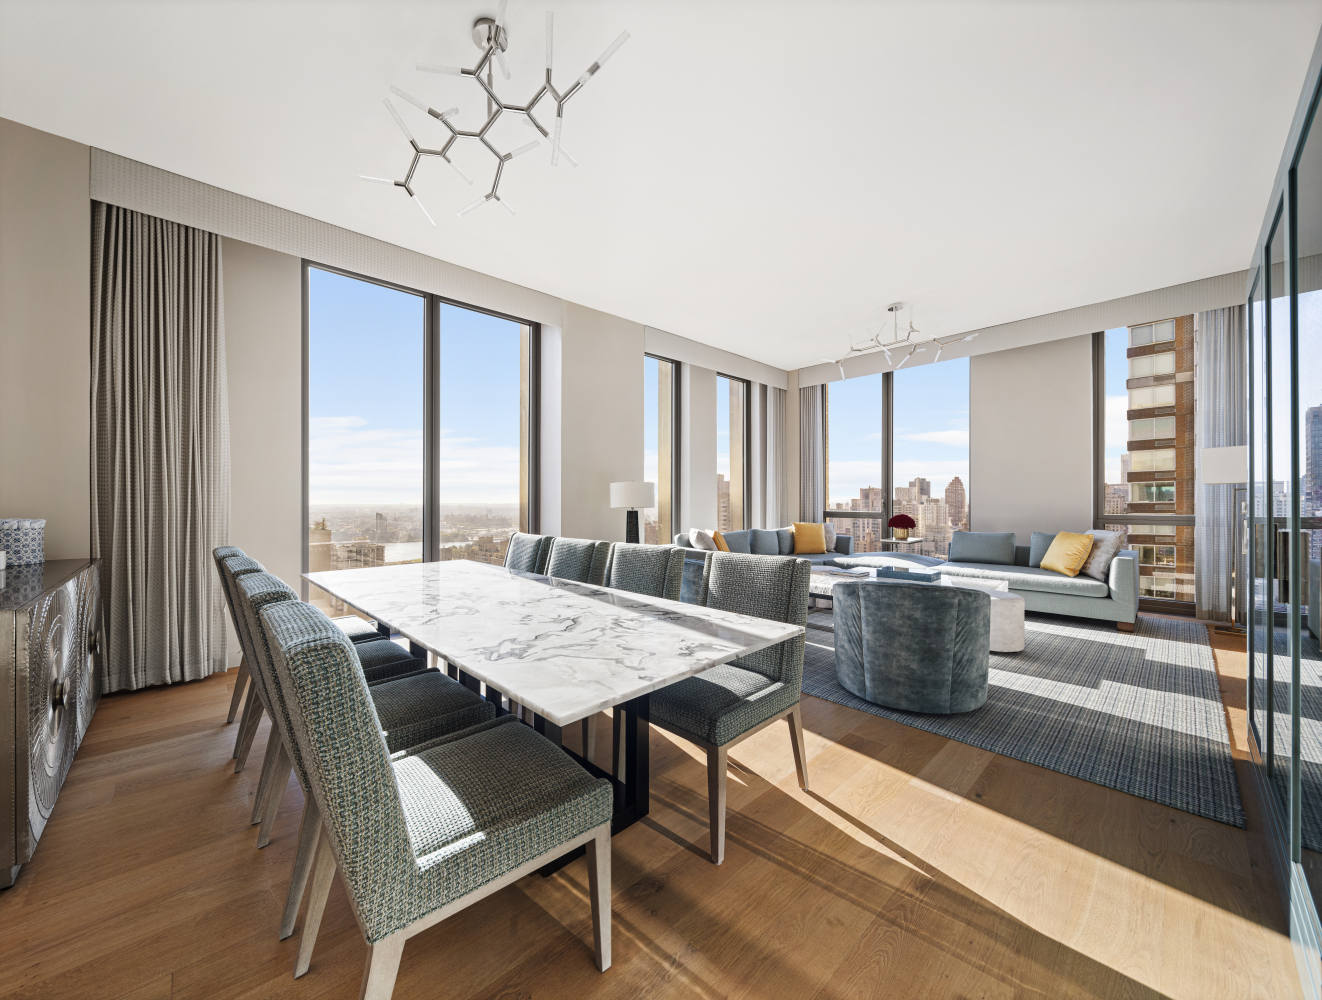 360 East 89th Street 31B, Yorkville, Upper East Side, NYC - 3 Bedrooms  
3.5 Bathrooms  
5 Rooms - 